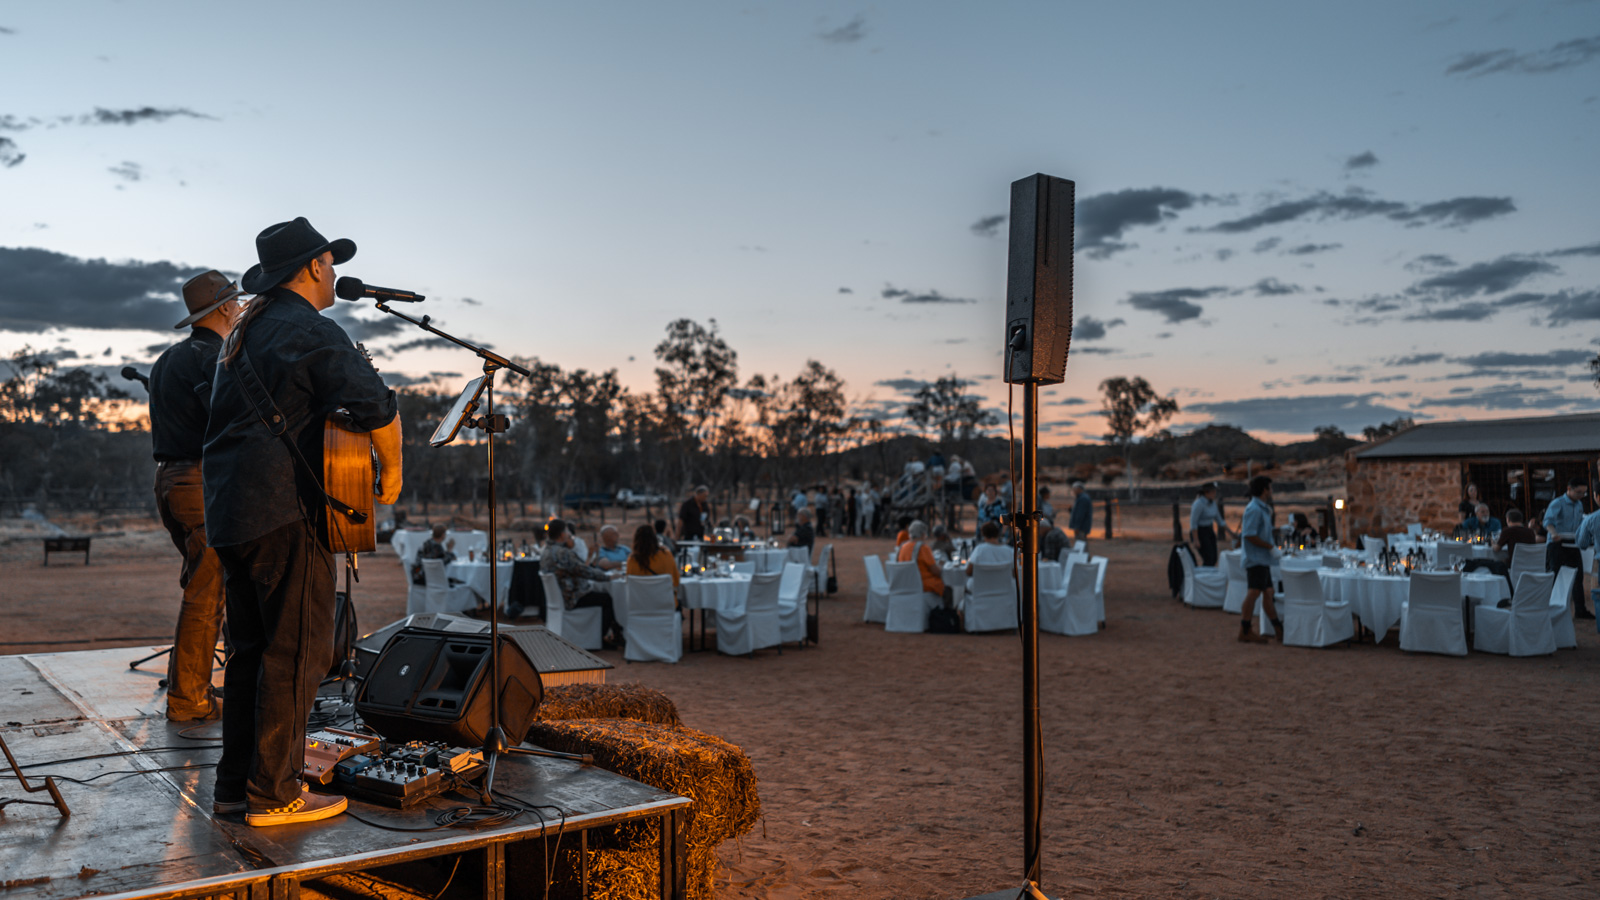 The Ghan Expedition dinner